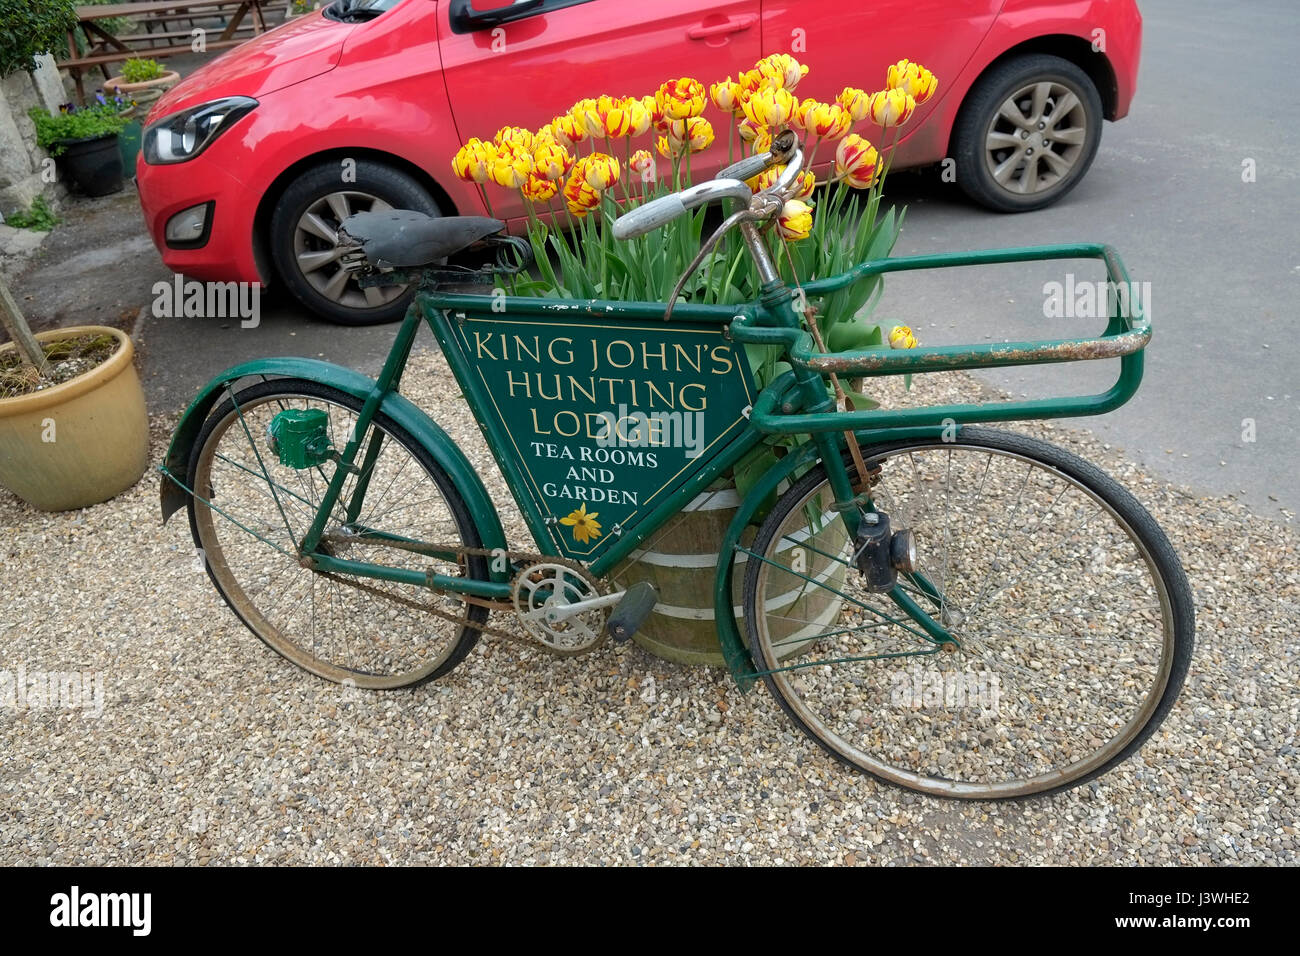 An old bicycle used a an advertisement for the King John's Hunting Lodge  tea rooms in Lacock, Wiltshire, UK. Stock Photo